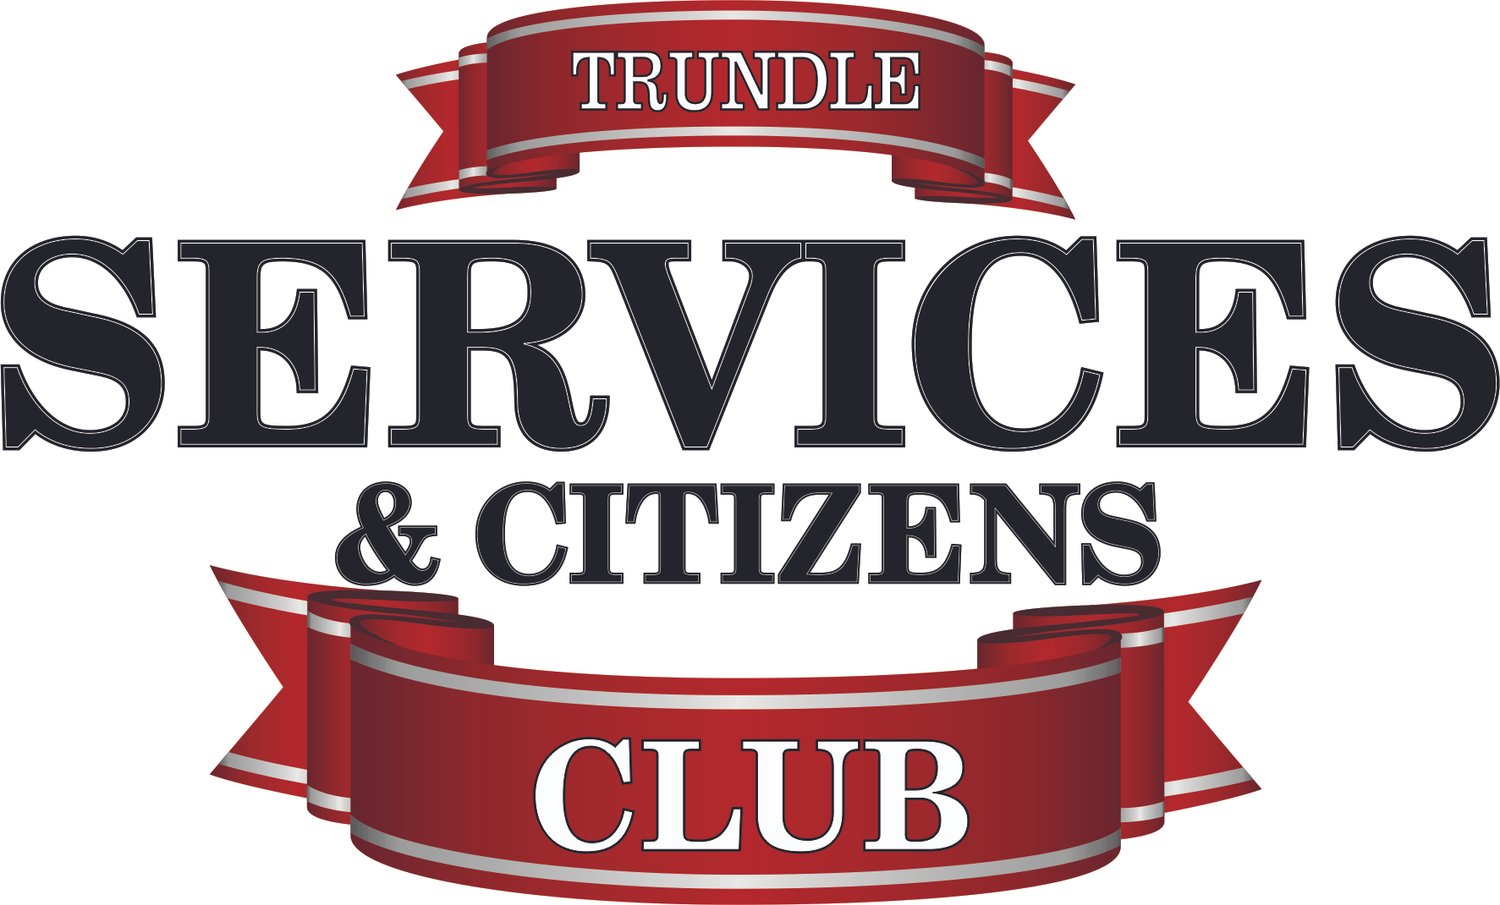 Trundle Services and Citizens Club